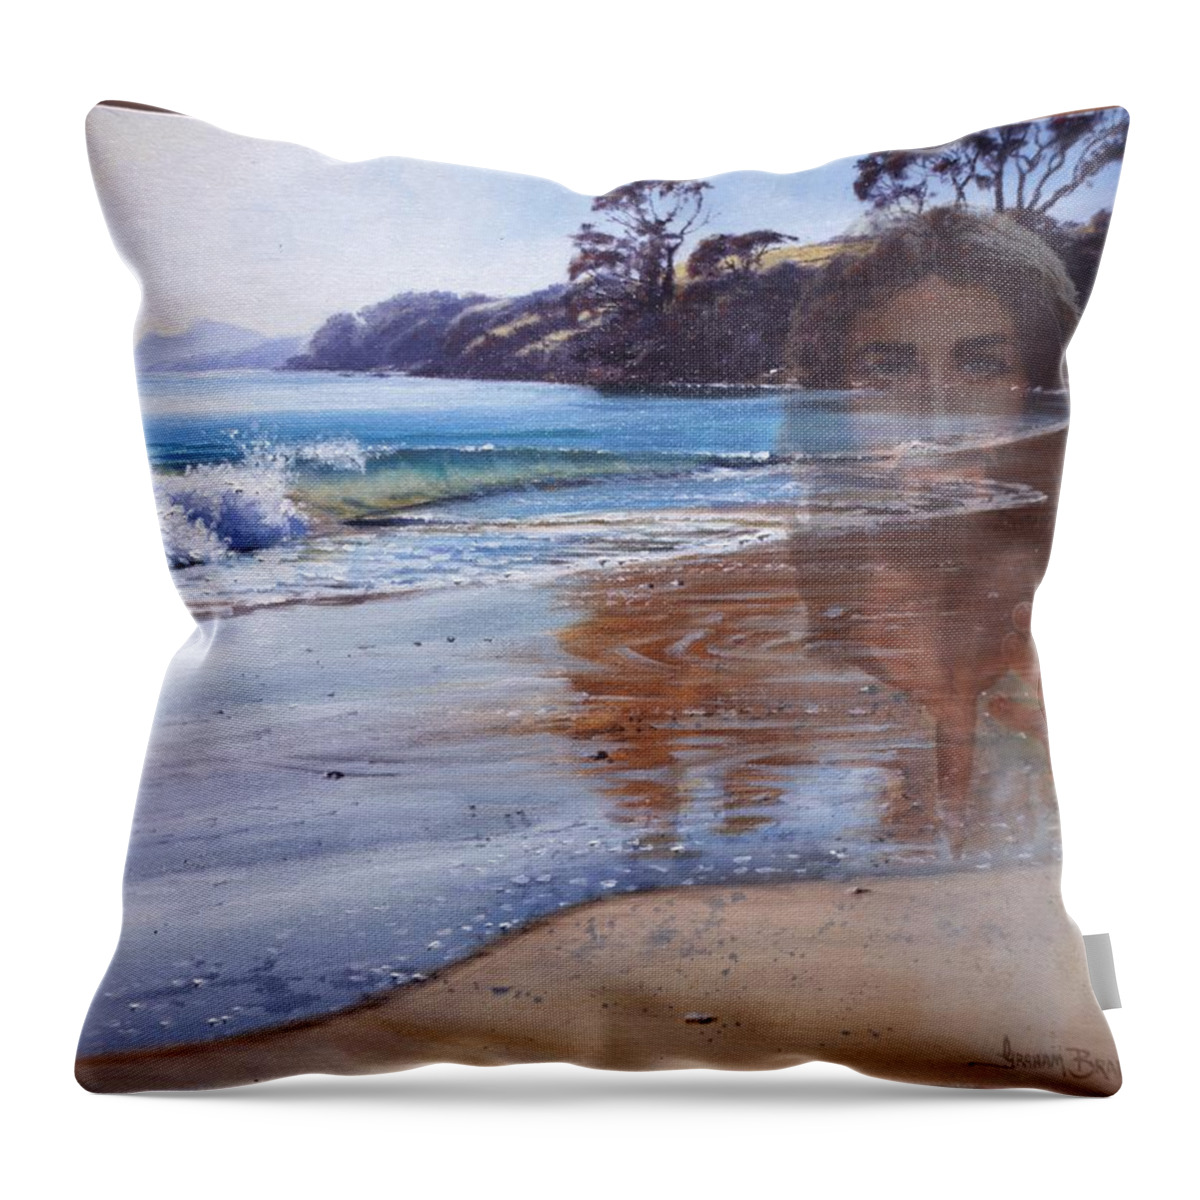  Throw Pillow featuring the painting 000068 by Graham Braddock